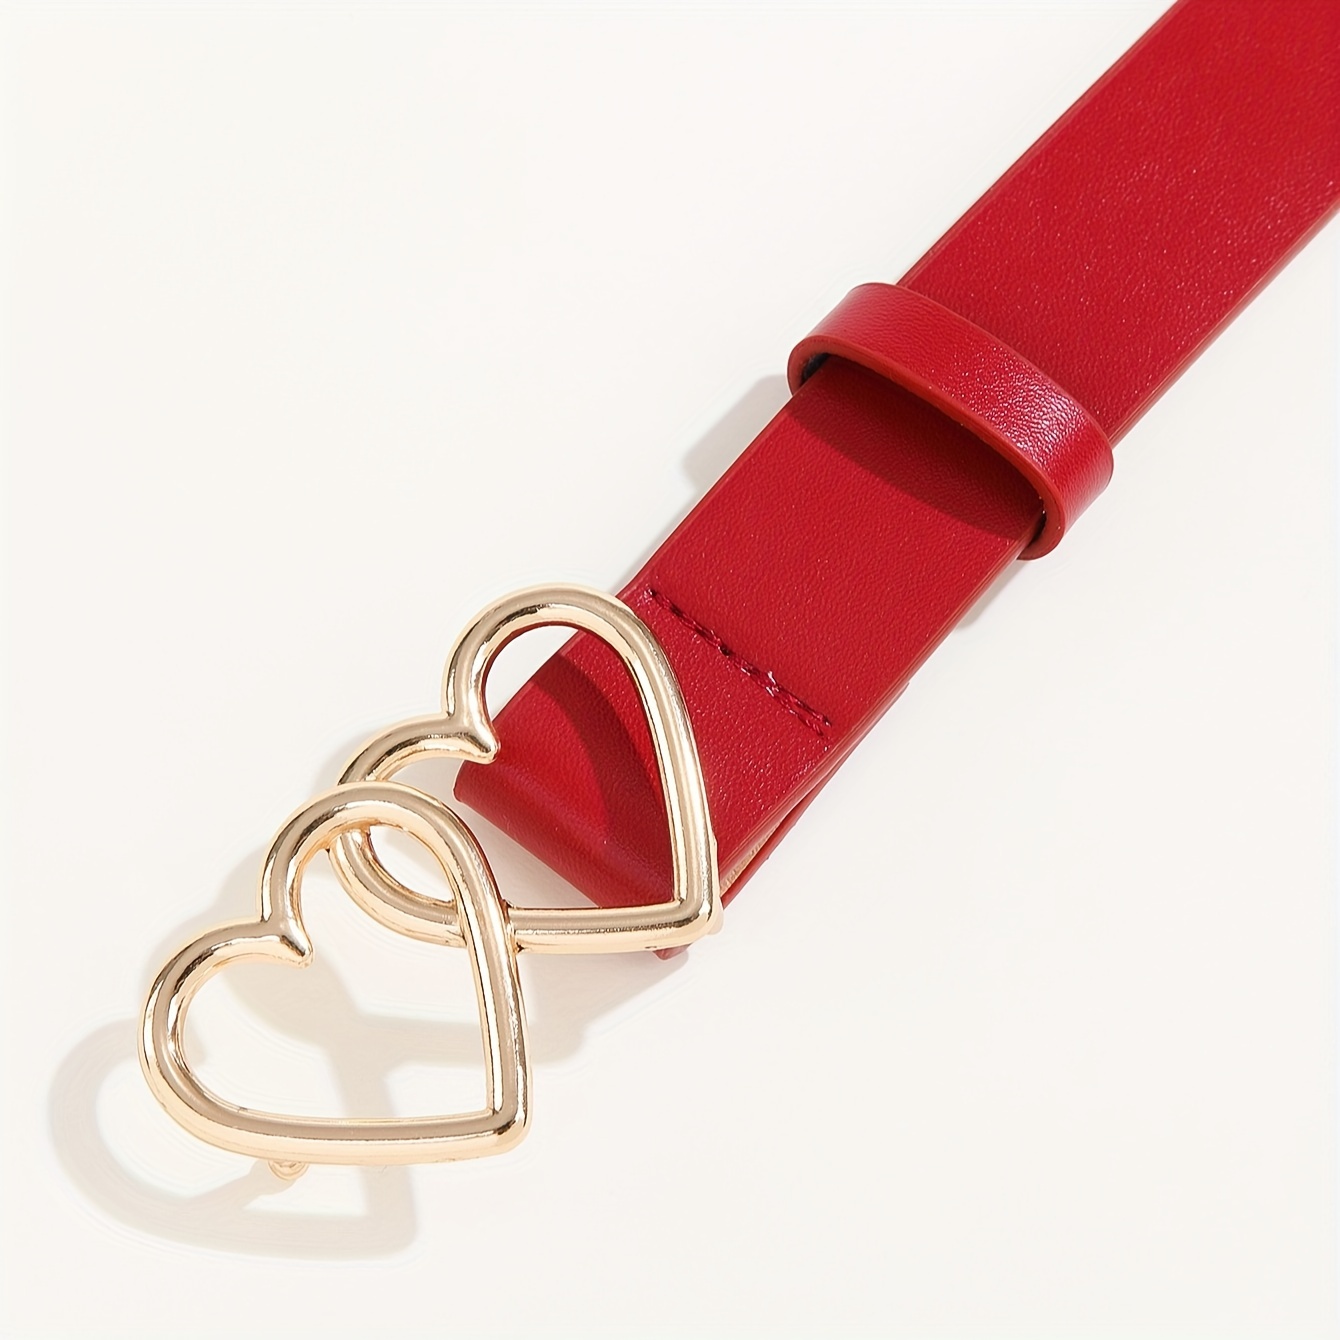 golden double heart buckle belt trendy red pu leather belt for women casual jeans pants belts valentines day gift